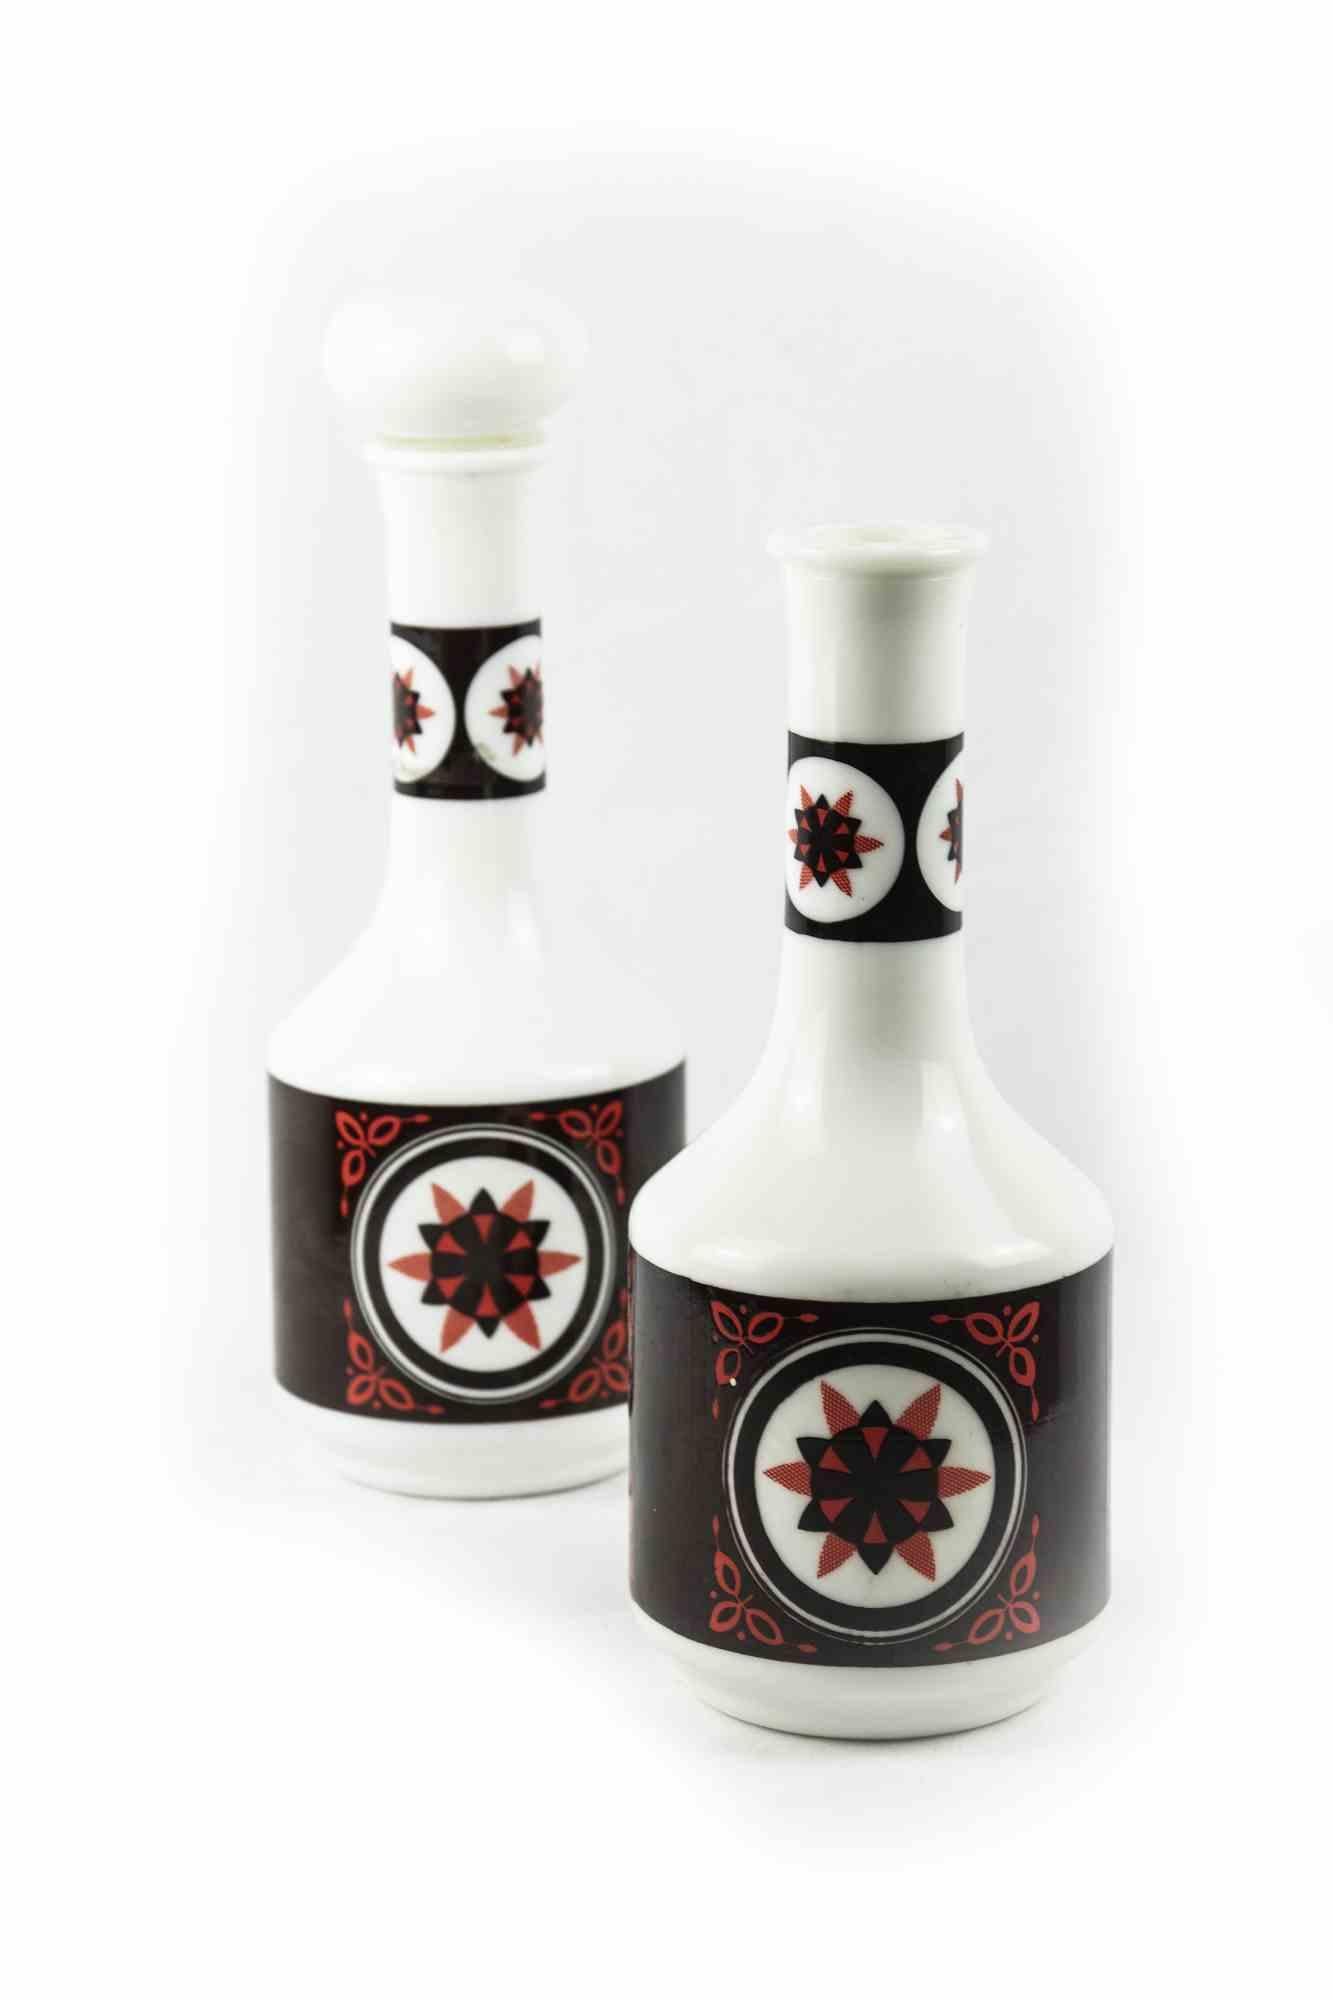 Pair of Chinese ceramic bottles is an original decorative object realized in the mid-20th century.

A vintage pair of decorated bottles for oil and vinegar. 

Good conditions. One of the bottle is without the cork.

Total dimensions: 27 x 10 x